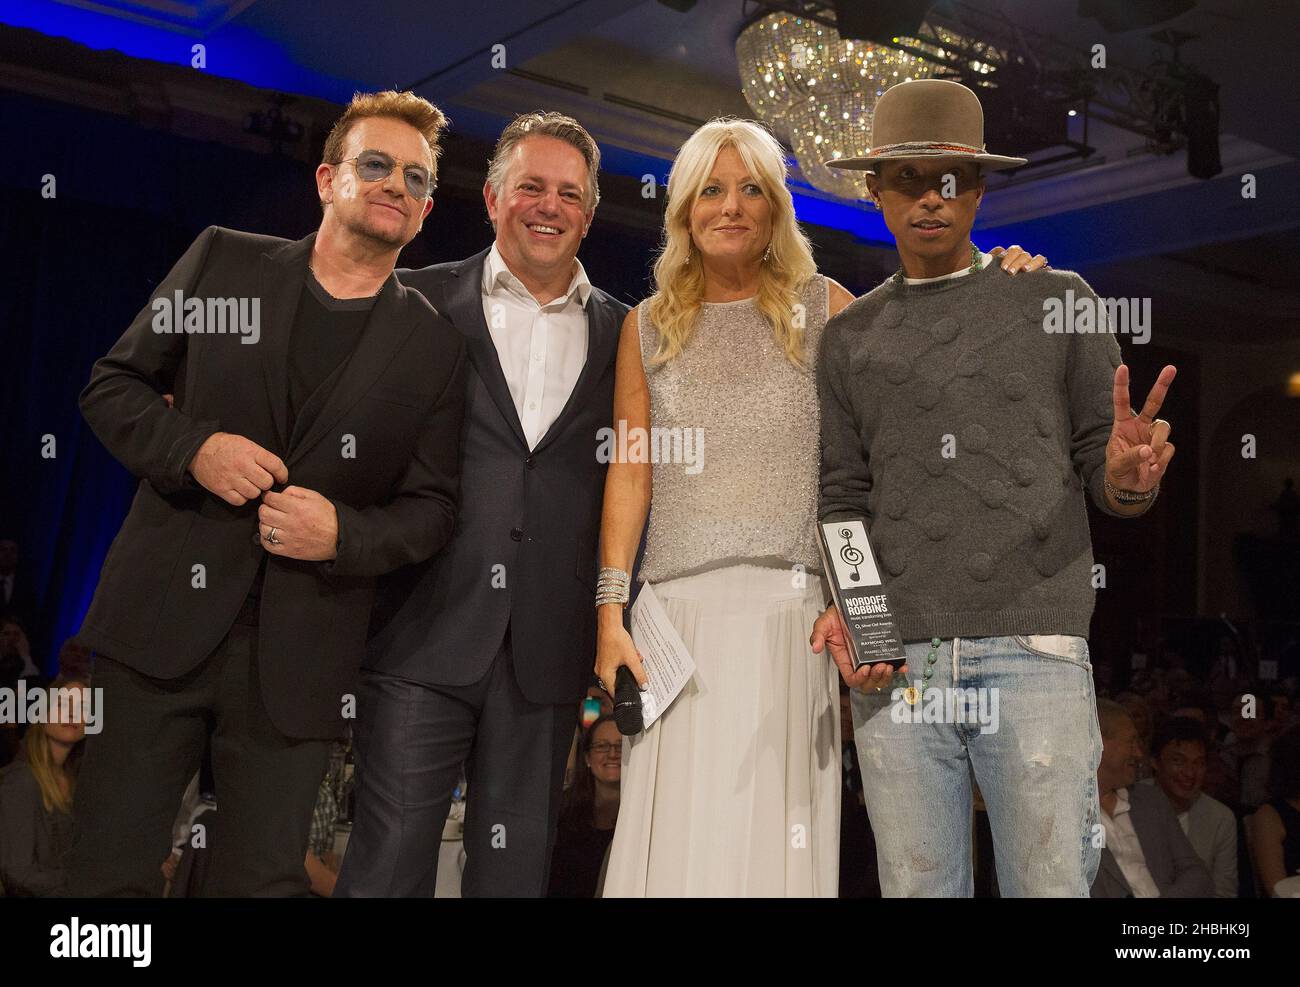 Bono (left) after presenting the Raymond Weil International Award to Pharrell Williams (far right), on stage with Gaby Roslin, at the Nordoff Robbins 02 Silver Clef Awards at the London Hilton Park Lane Hotel in London. Stock Photo